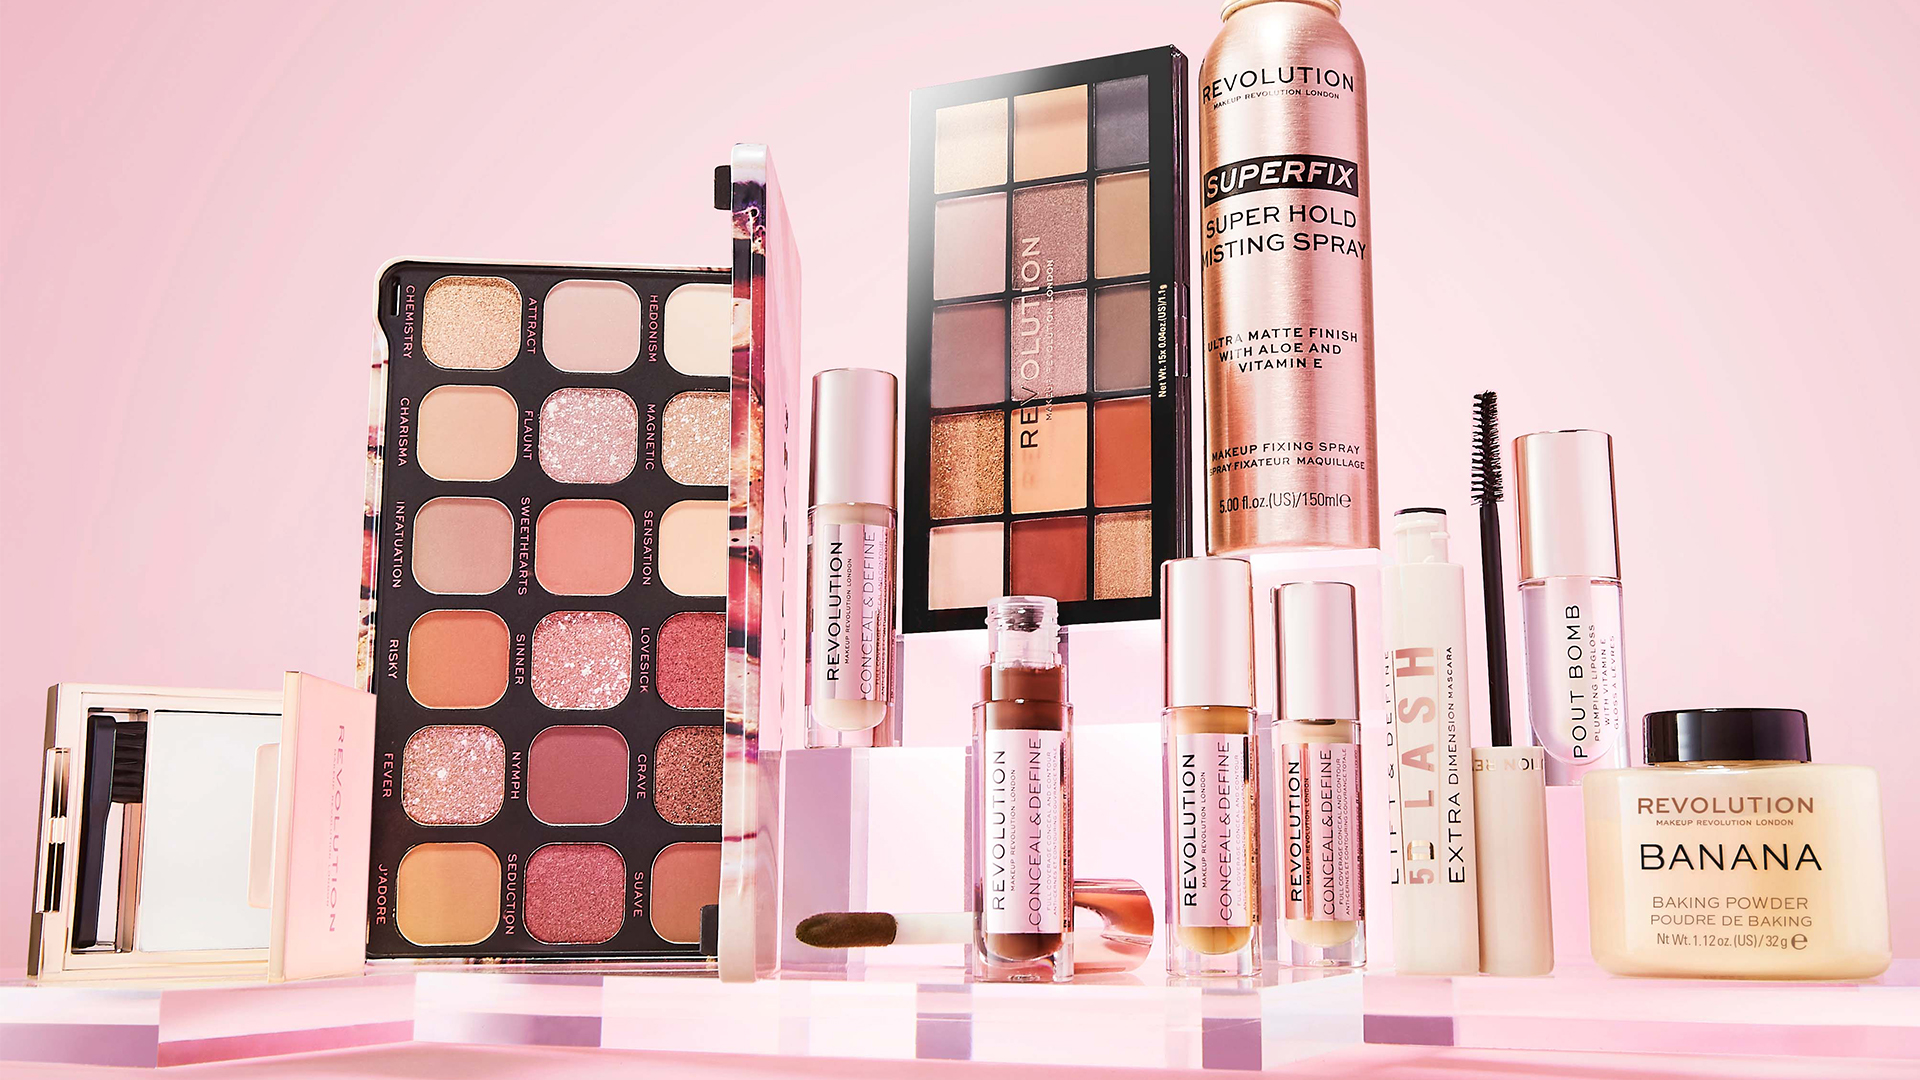 UK Cosmetics Brand Revolution Beauty Sees 60% Yoy Sales Growth in Q1 After Raising £32 Million in Funding